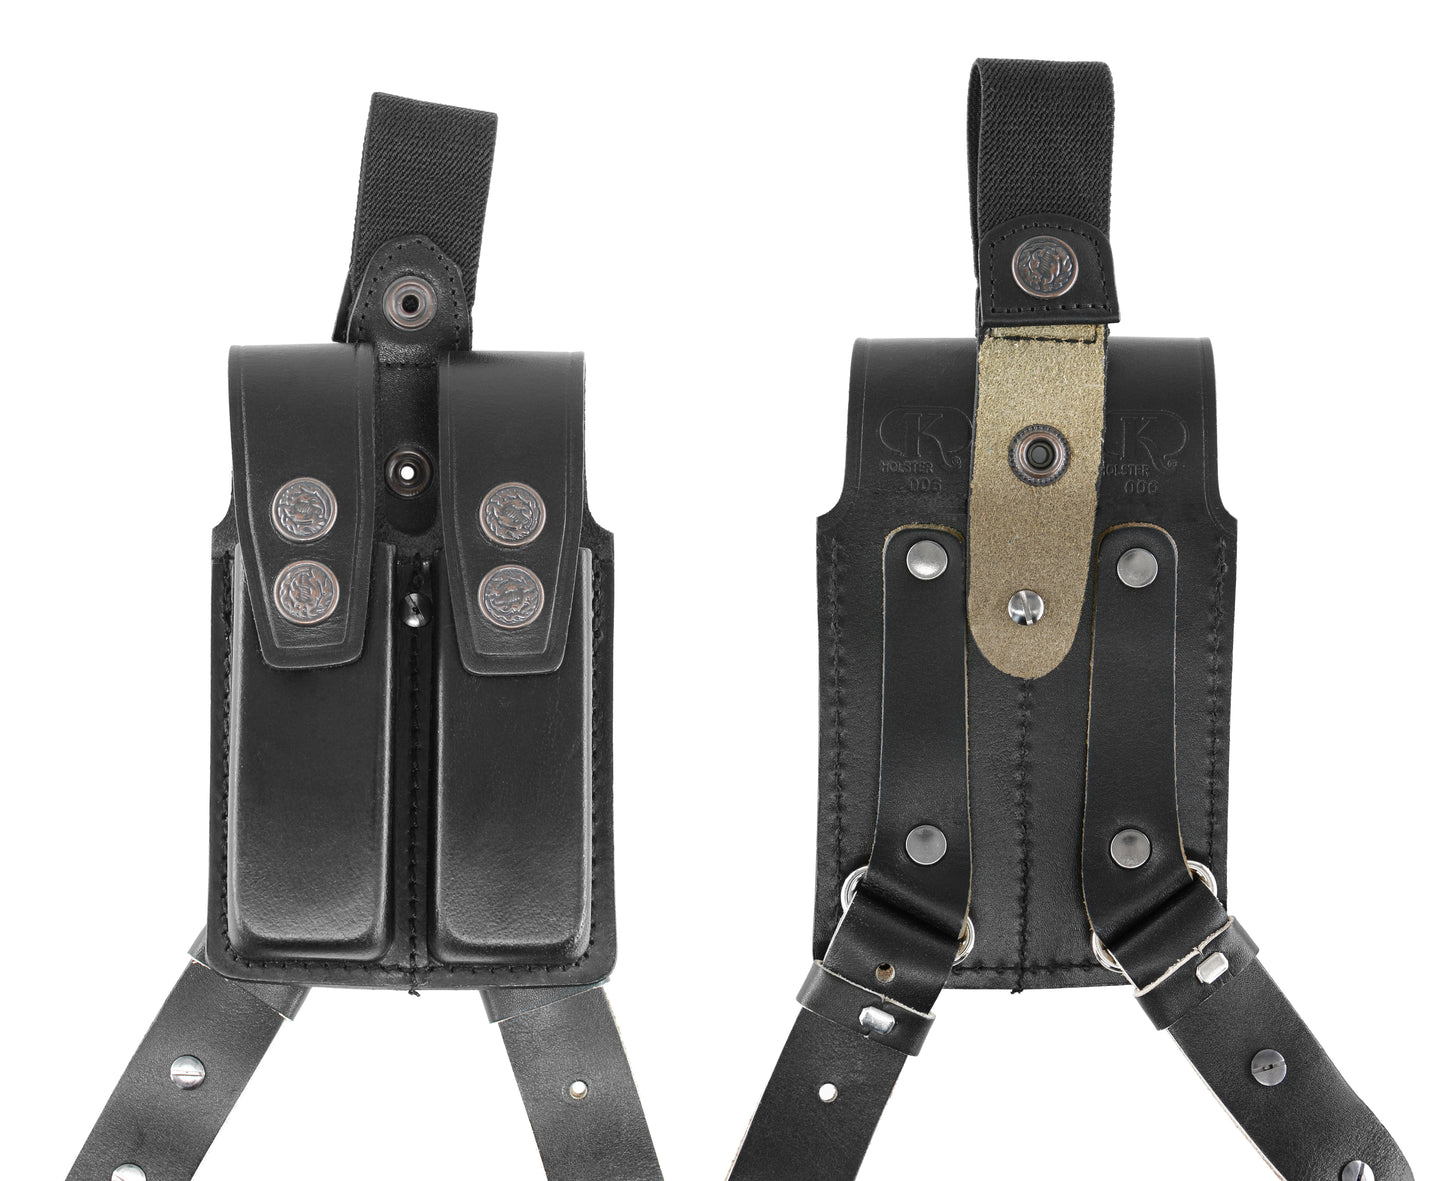 K456 Vertical Shoulder Holster with Double Mag Pouch Fits Glock 17 Glock 19 Glock 22 Glock 23 Free Extension for Big Body Size!